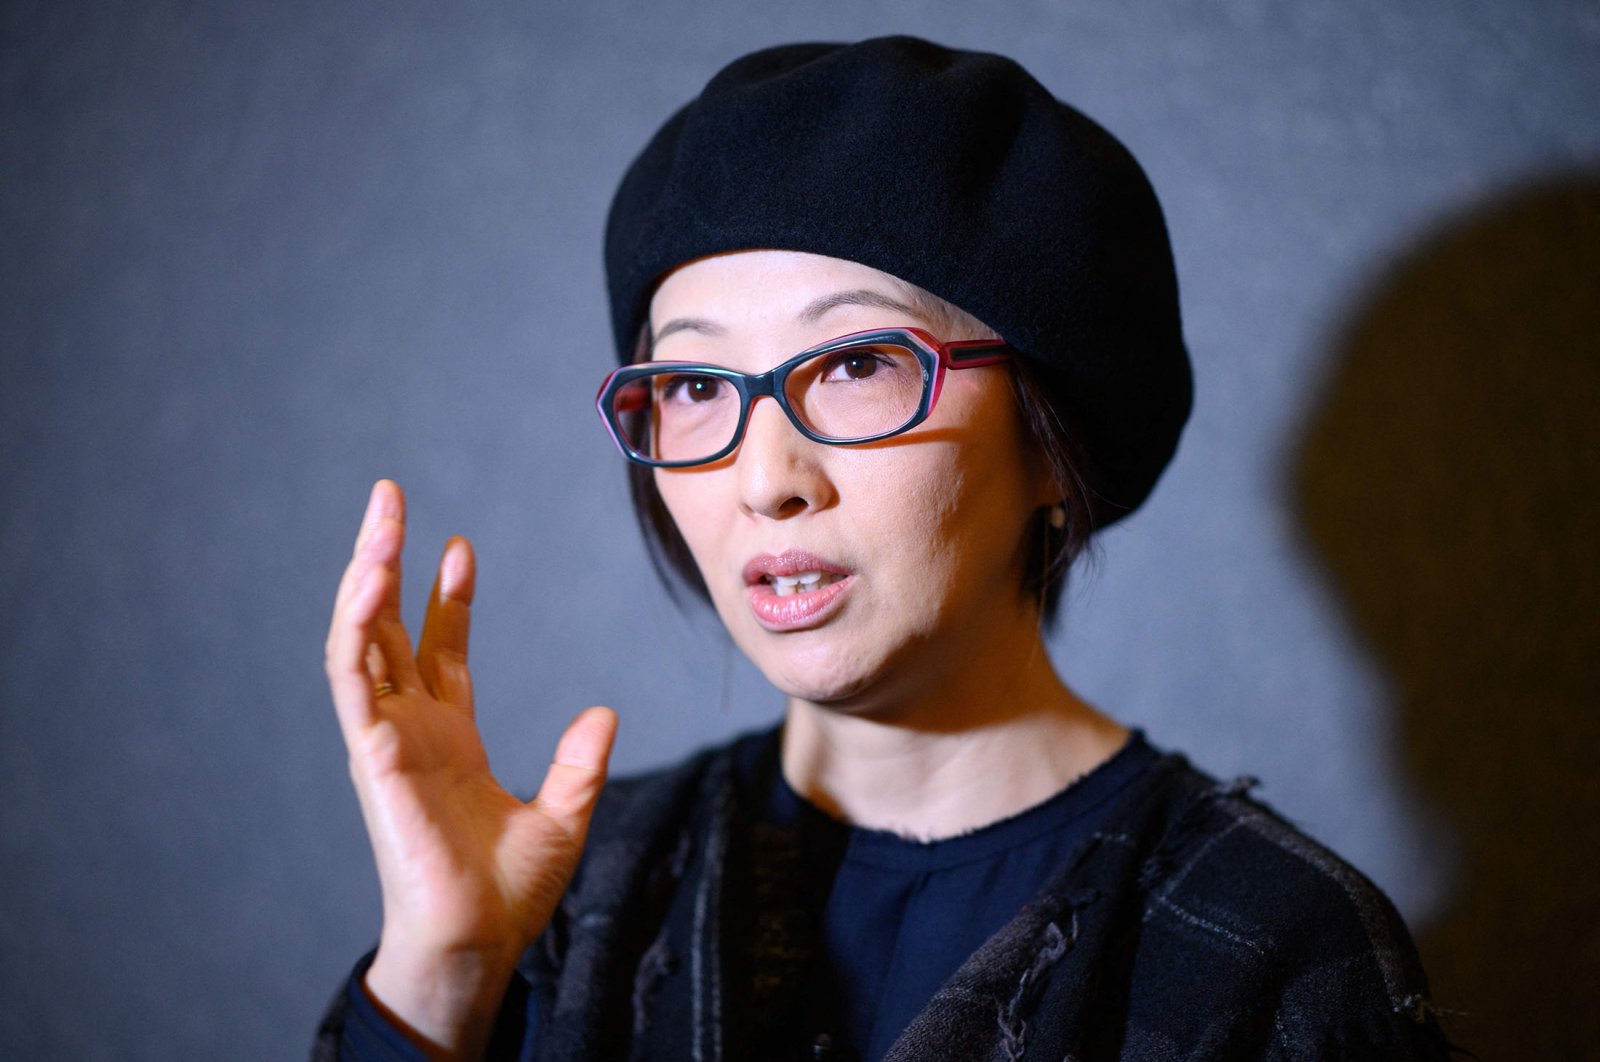 Japanese-born South Korean filmmaker Yang Yonghi gestures during an interview with AFP in Seoul, South Korea, Nov. 29, 2021. (AFP Photo)